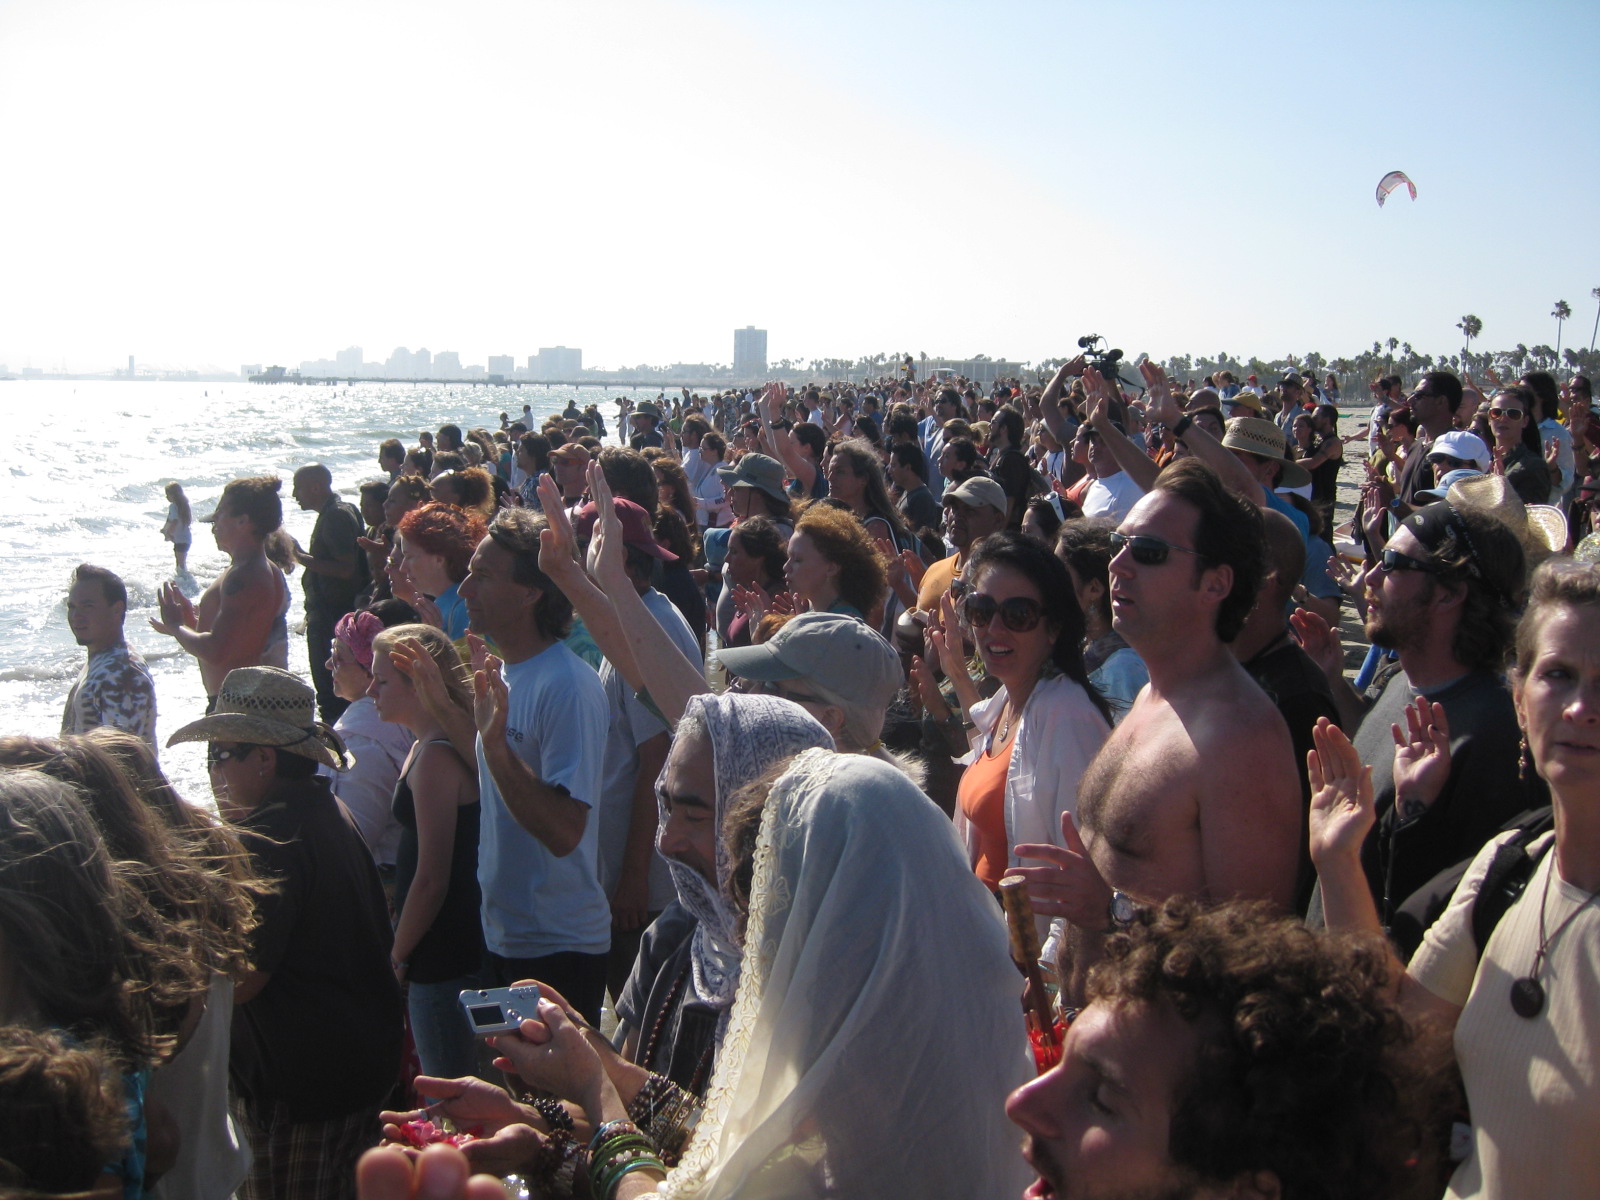 Thousands gather to Partake in Water Ceremony - Dr. Emoto